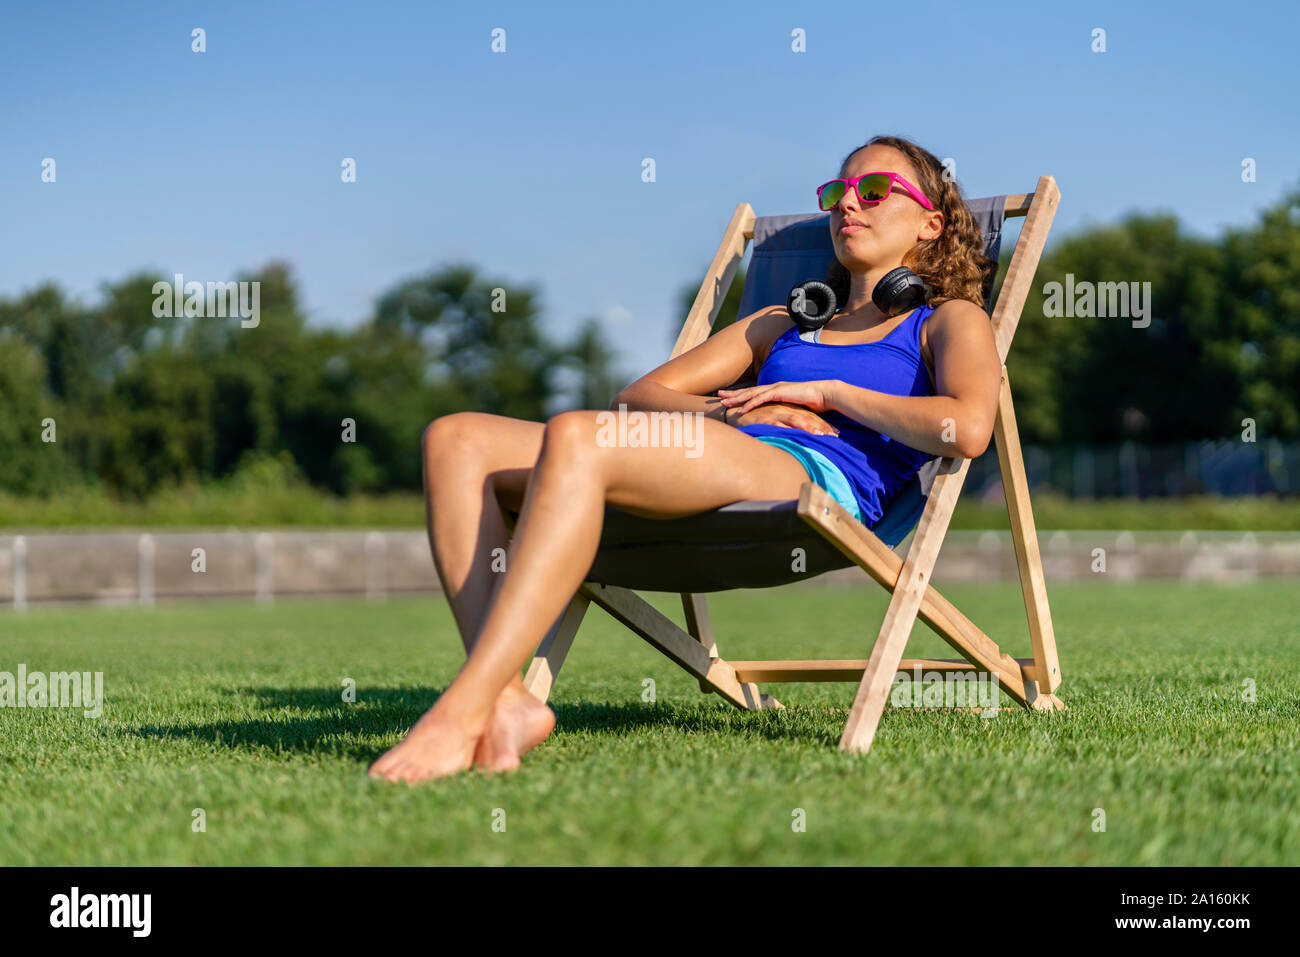 Young woman sunbathing on lawn Stock Photo